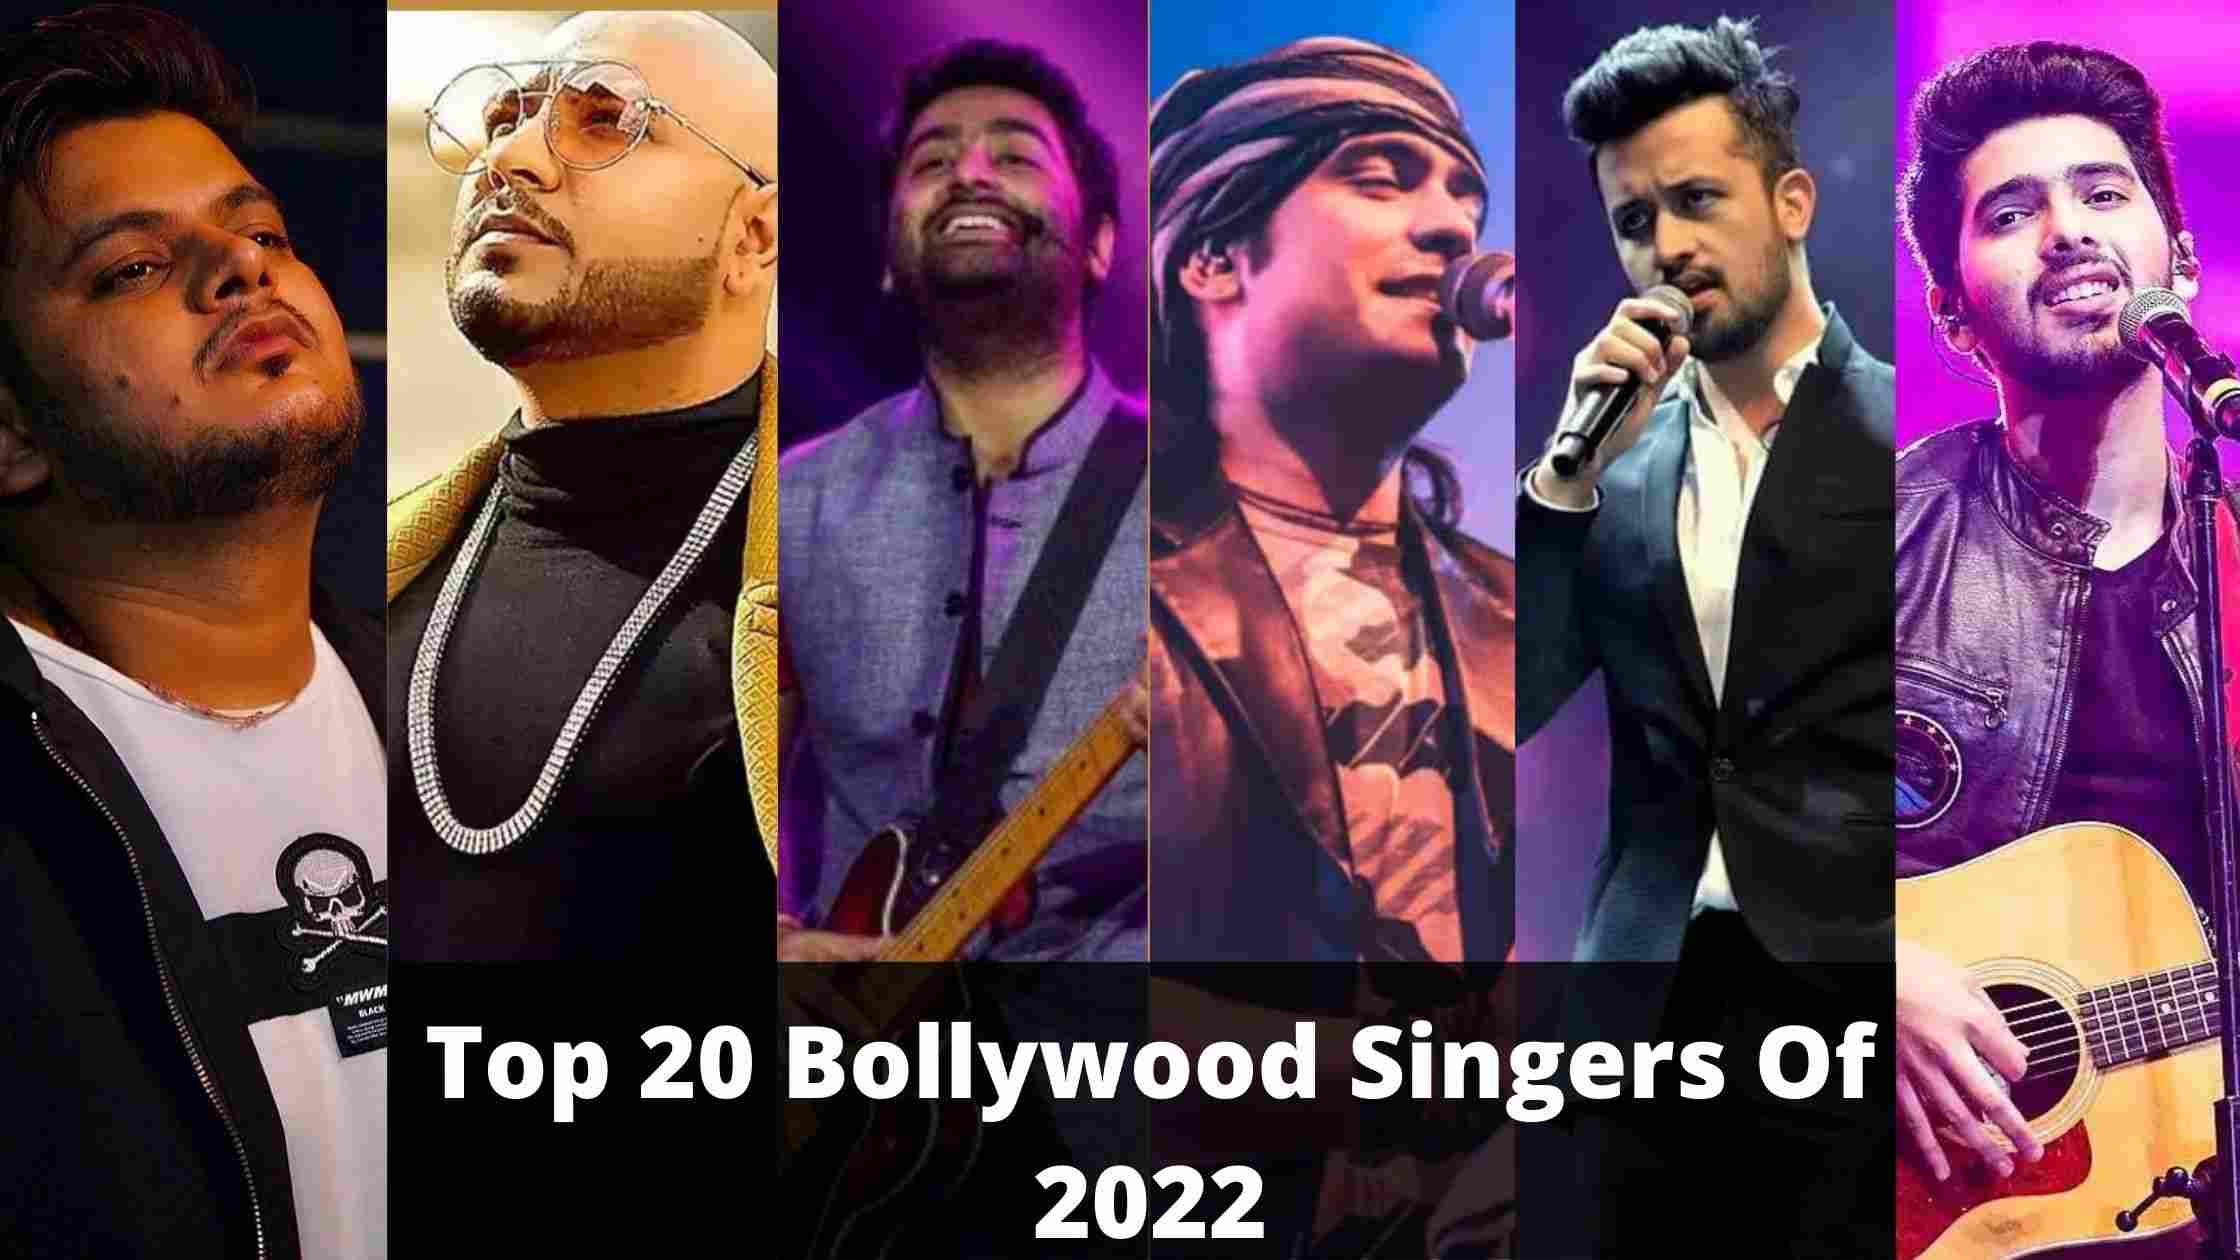 Top 20 Bollywood Singers Of 2022 - With Best Songs And Albums